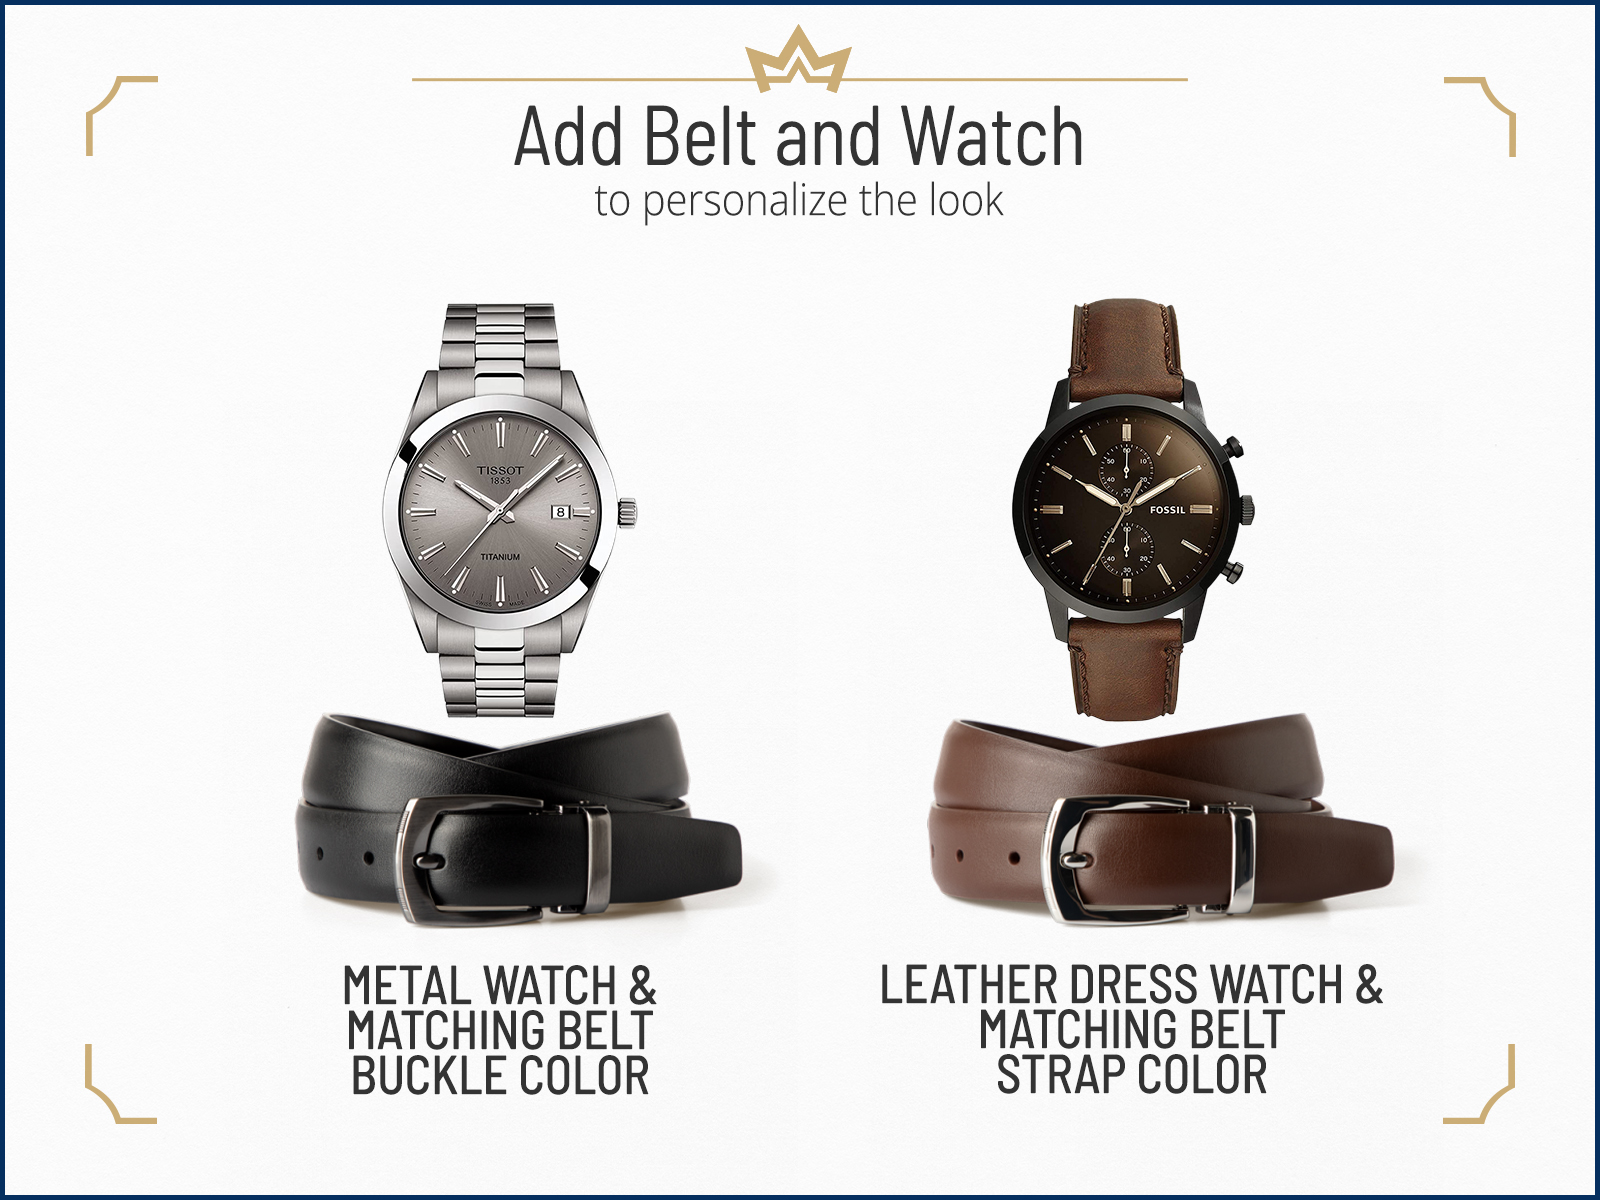 Recommended dress watch and belt combinations for cocktail attire